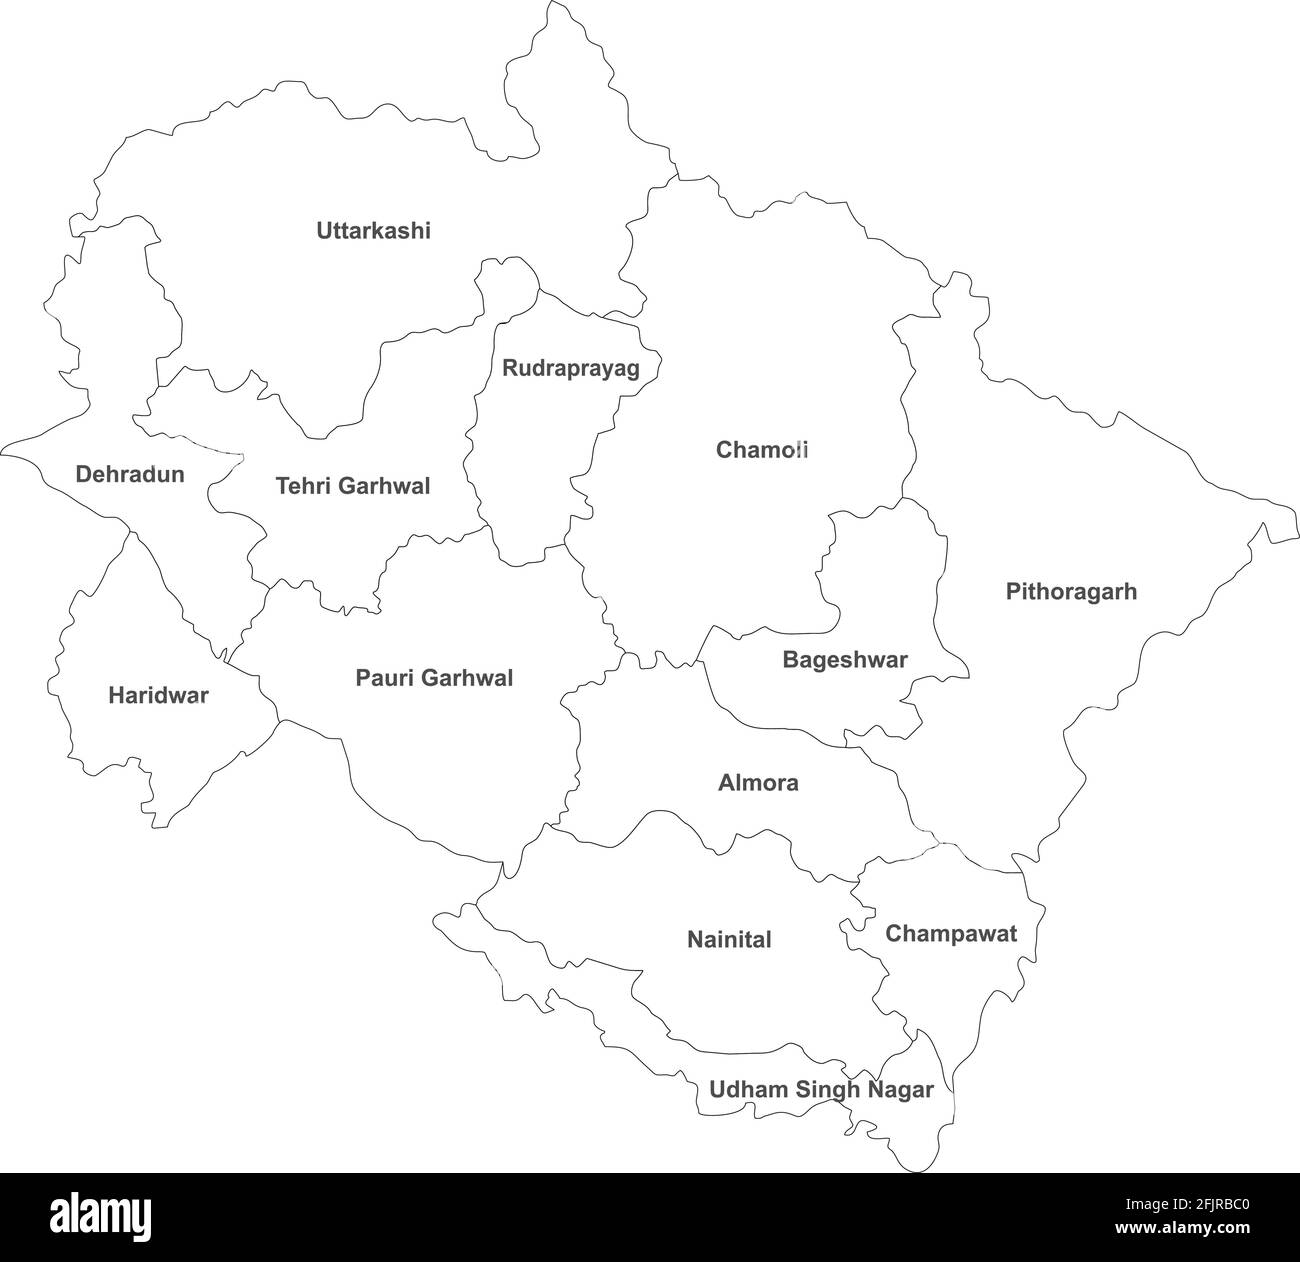 Uttarakhand districts map with name labels. Indian State maps. White background. Stock Vector